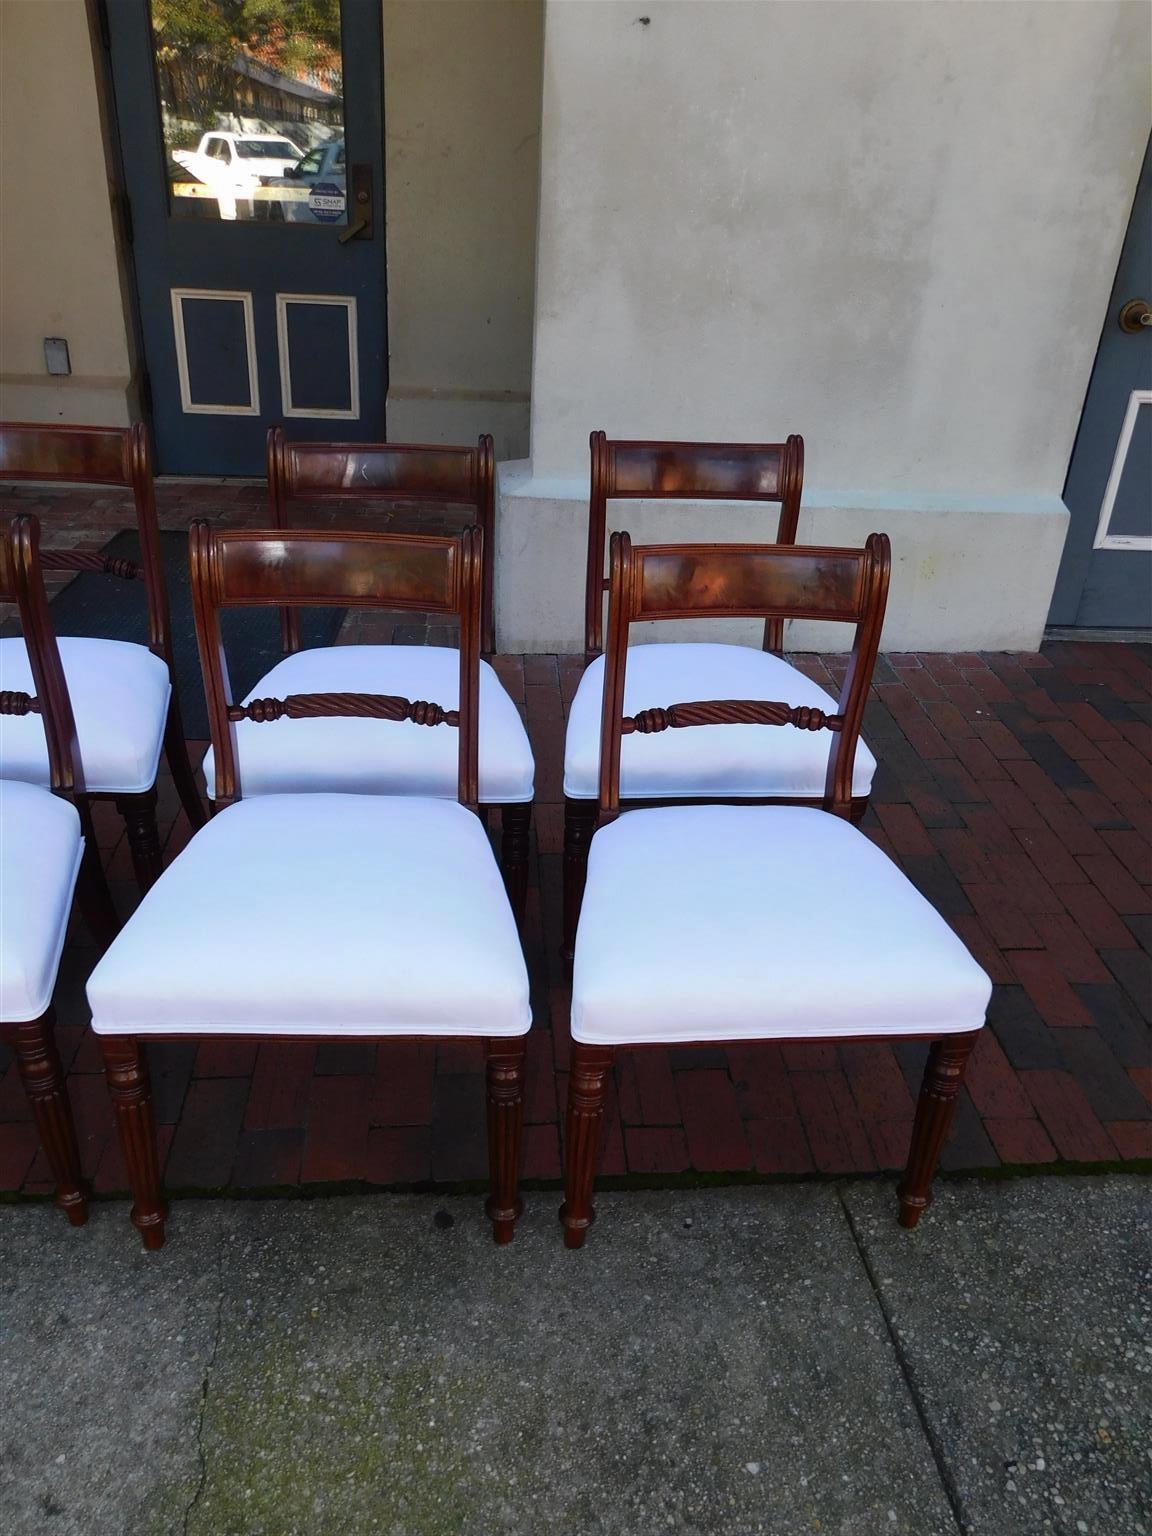 Early 19th Century English Regency Set of Eight Mahogany Dining Room Chairs W/ Reeded Legs C. 1810 For Sale